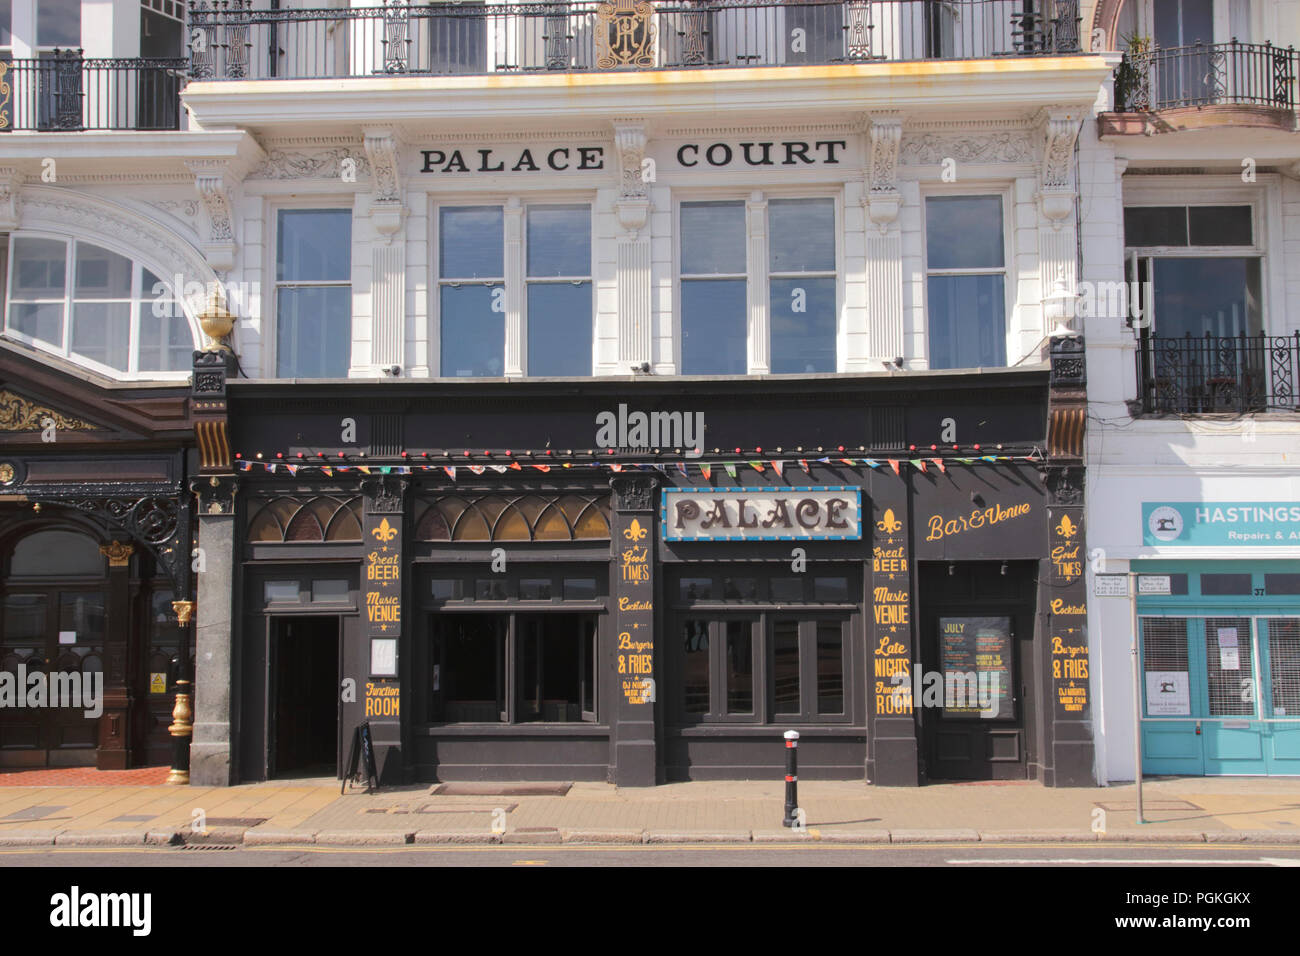 Palace Bar bei Hastings East Sussex UK Stockfoto